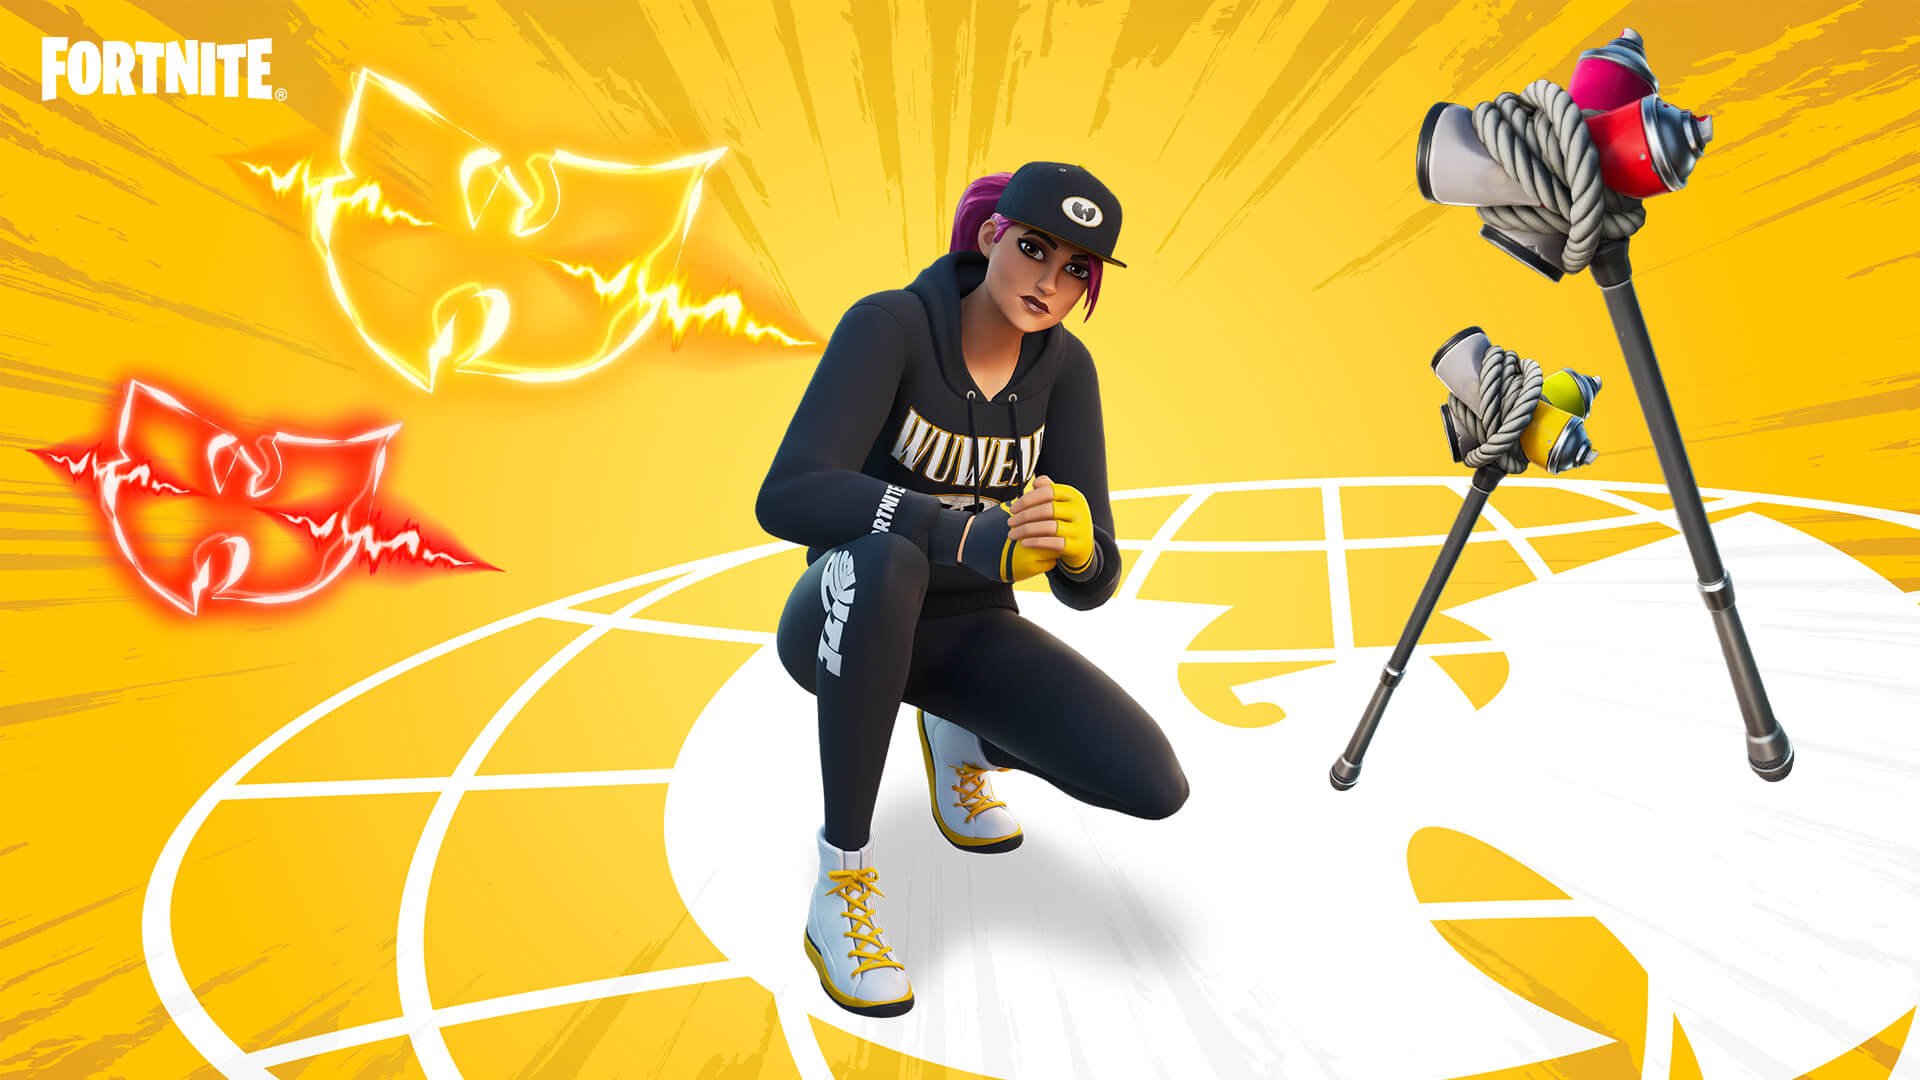 Fortnite is getting Wu-Tang Clan outfits and items